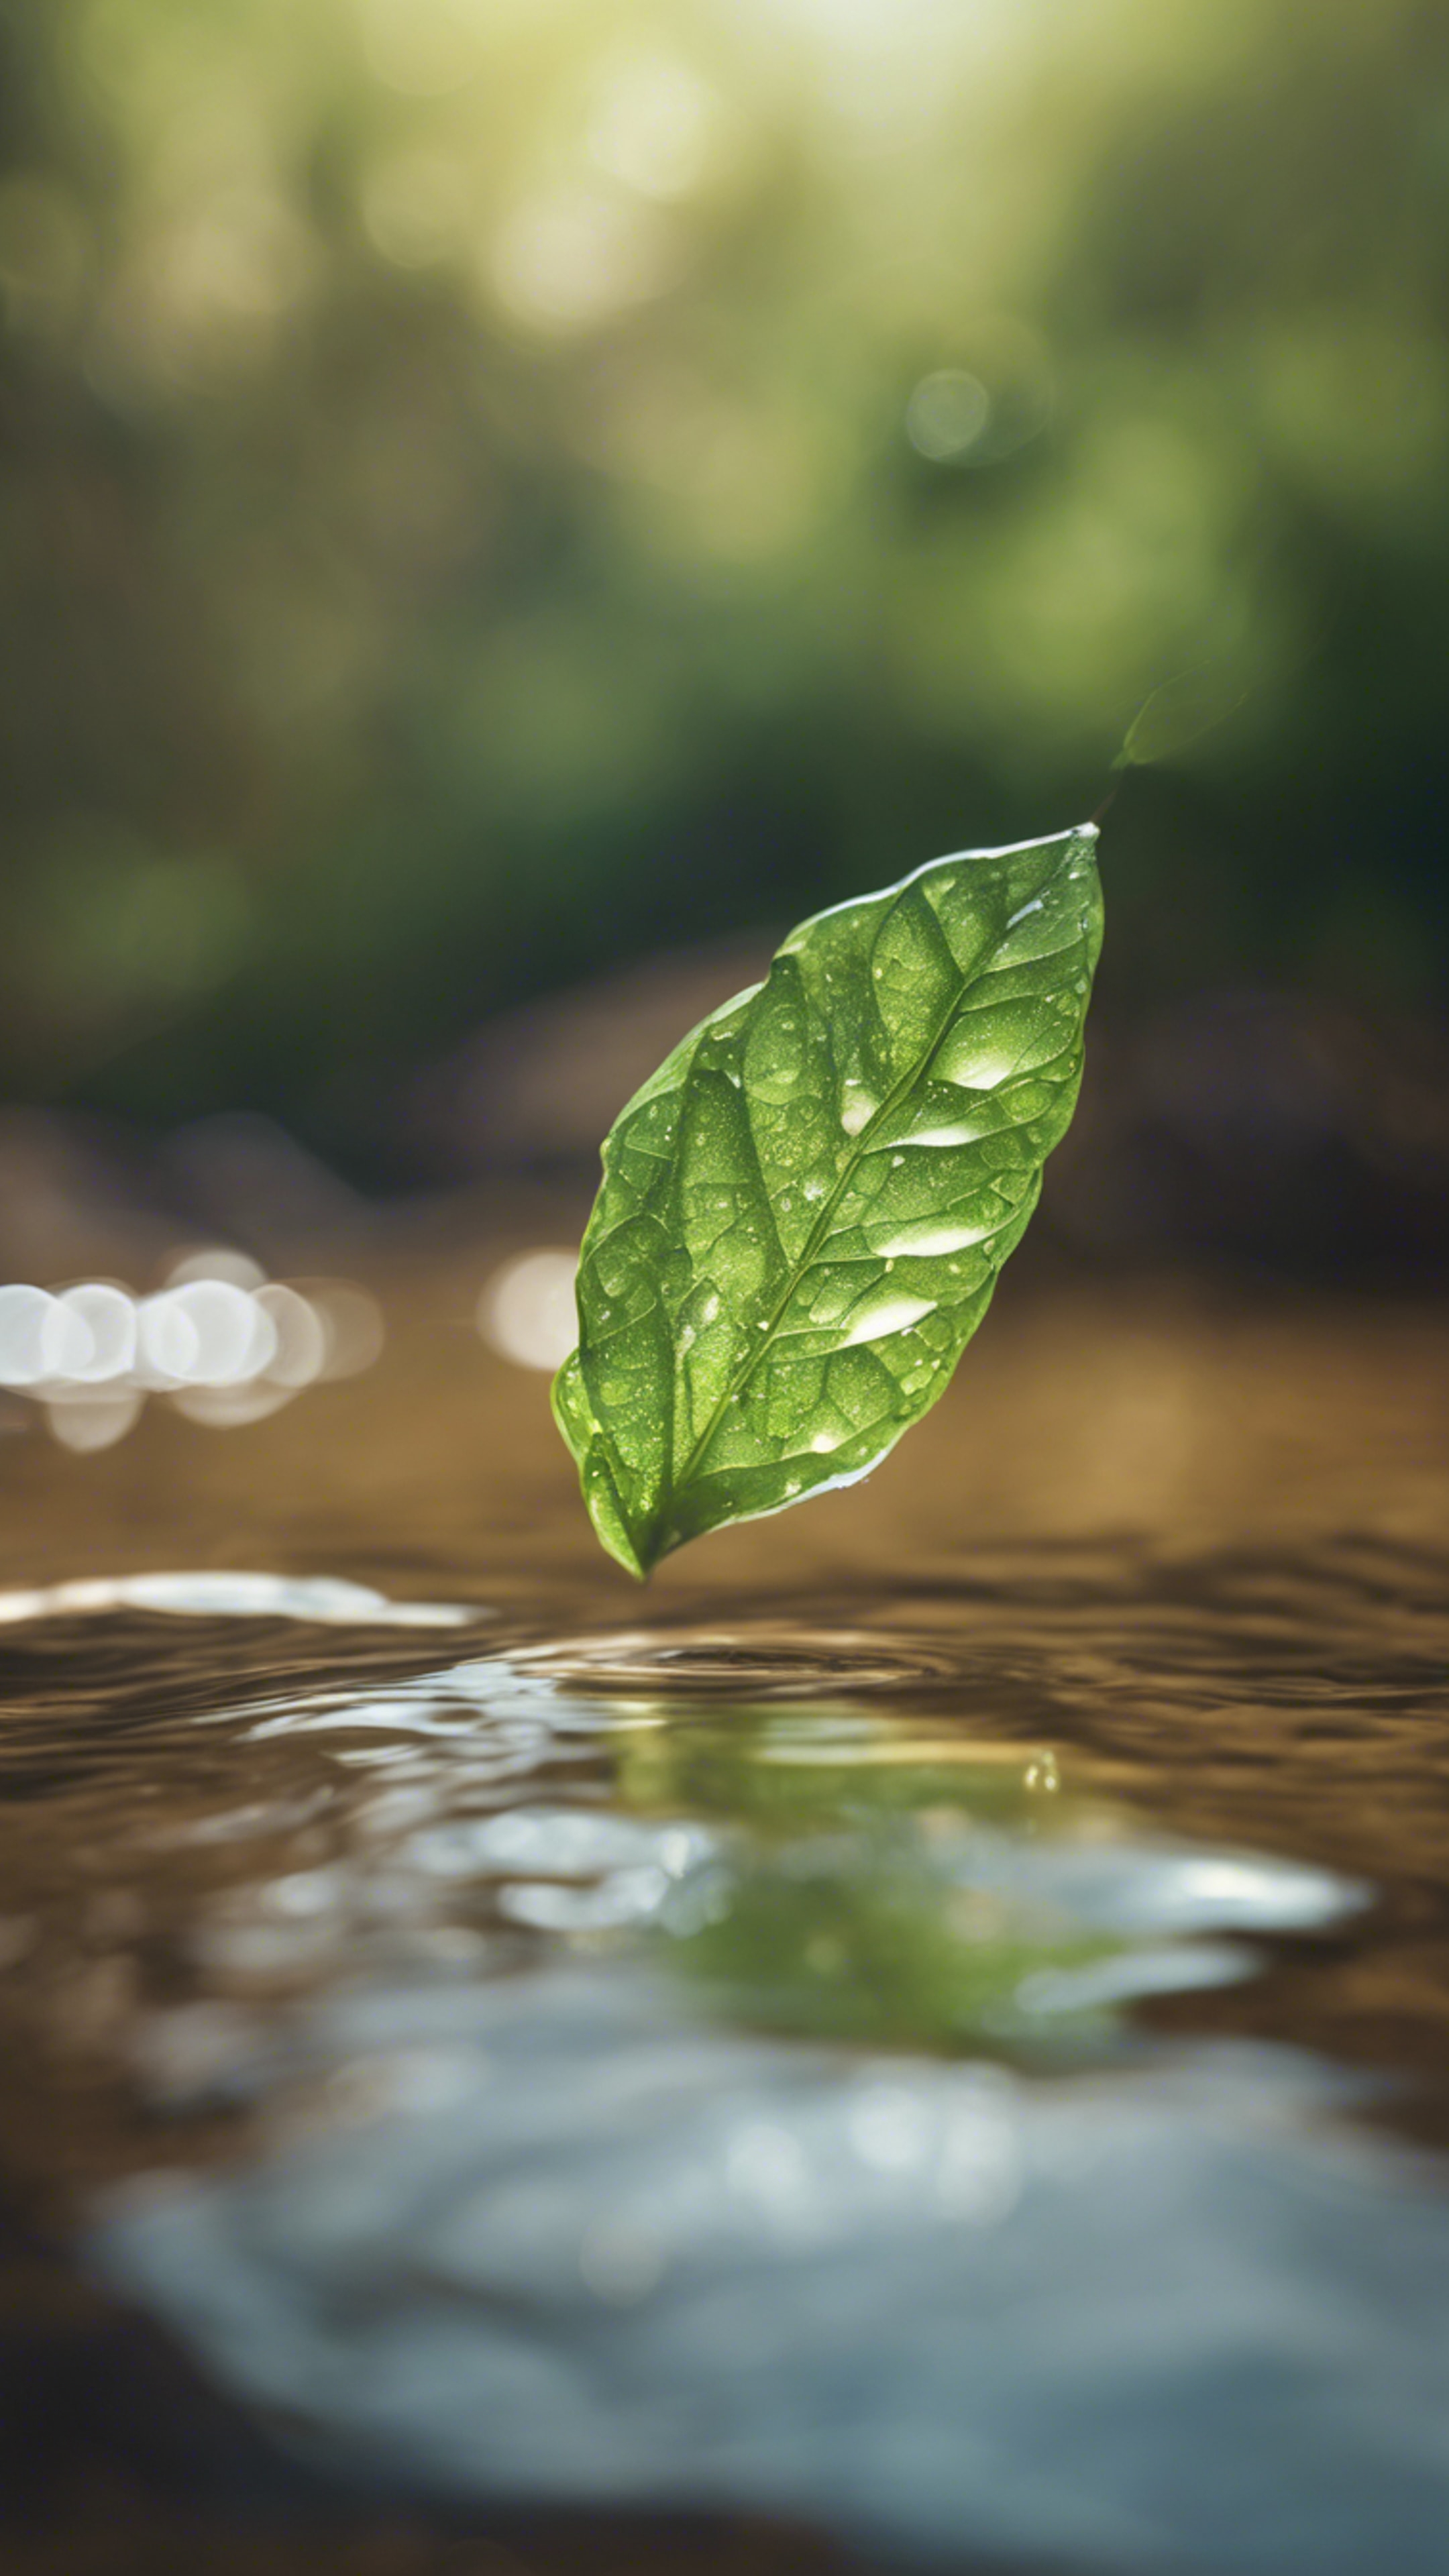 A single, dew-kissed green leaf floating on the gently flowing water of a brown river bed.壁紙[f57dd6740da24e10bc11]